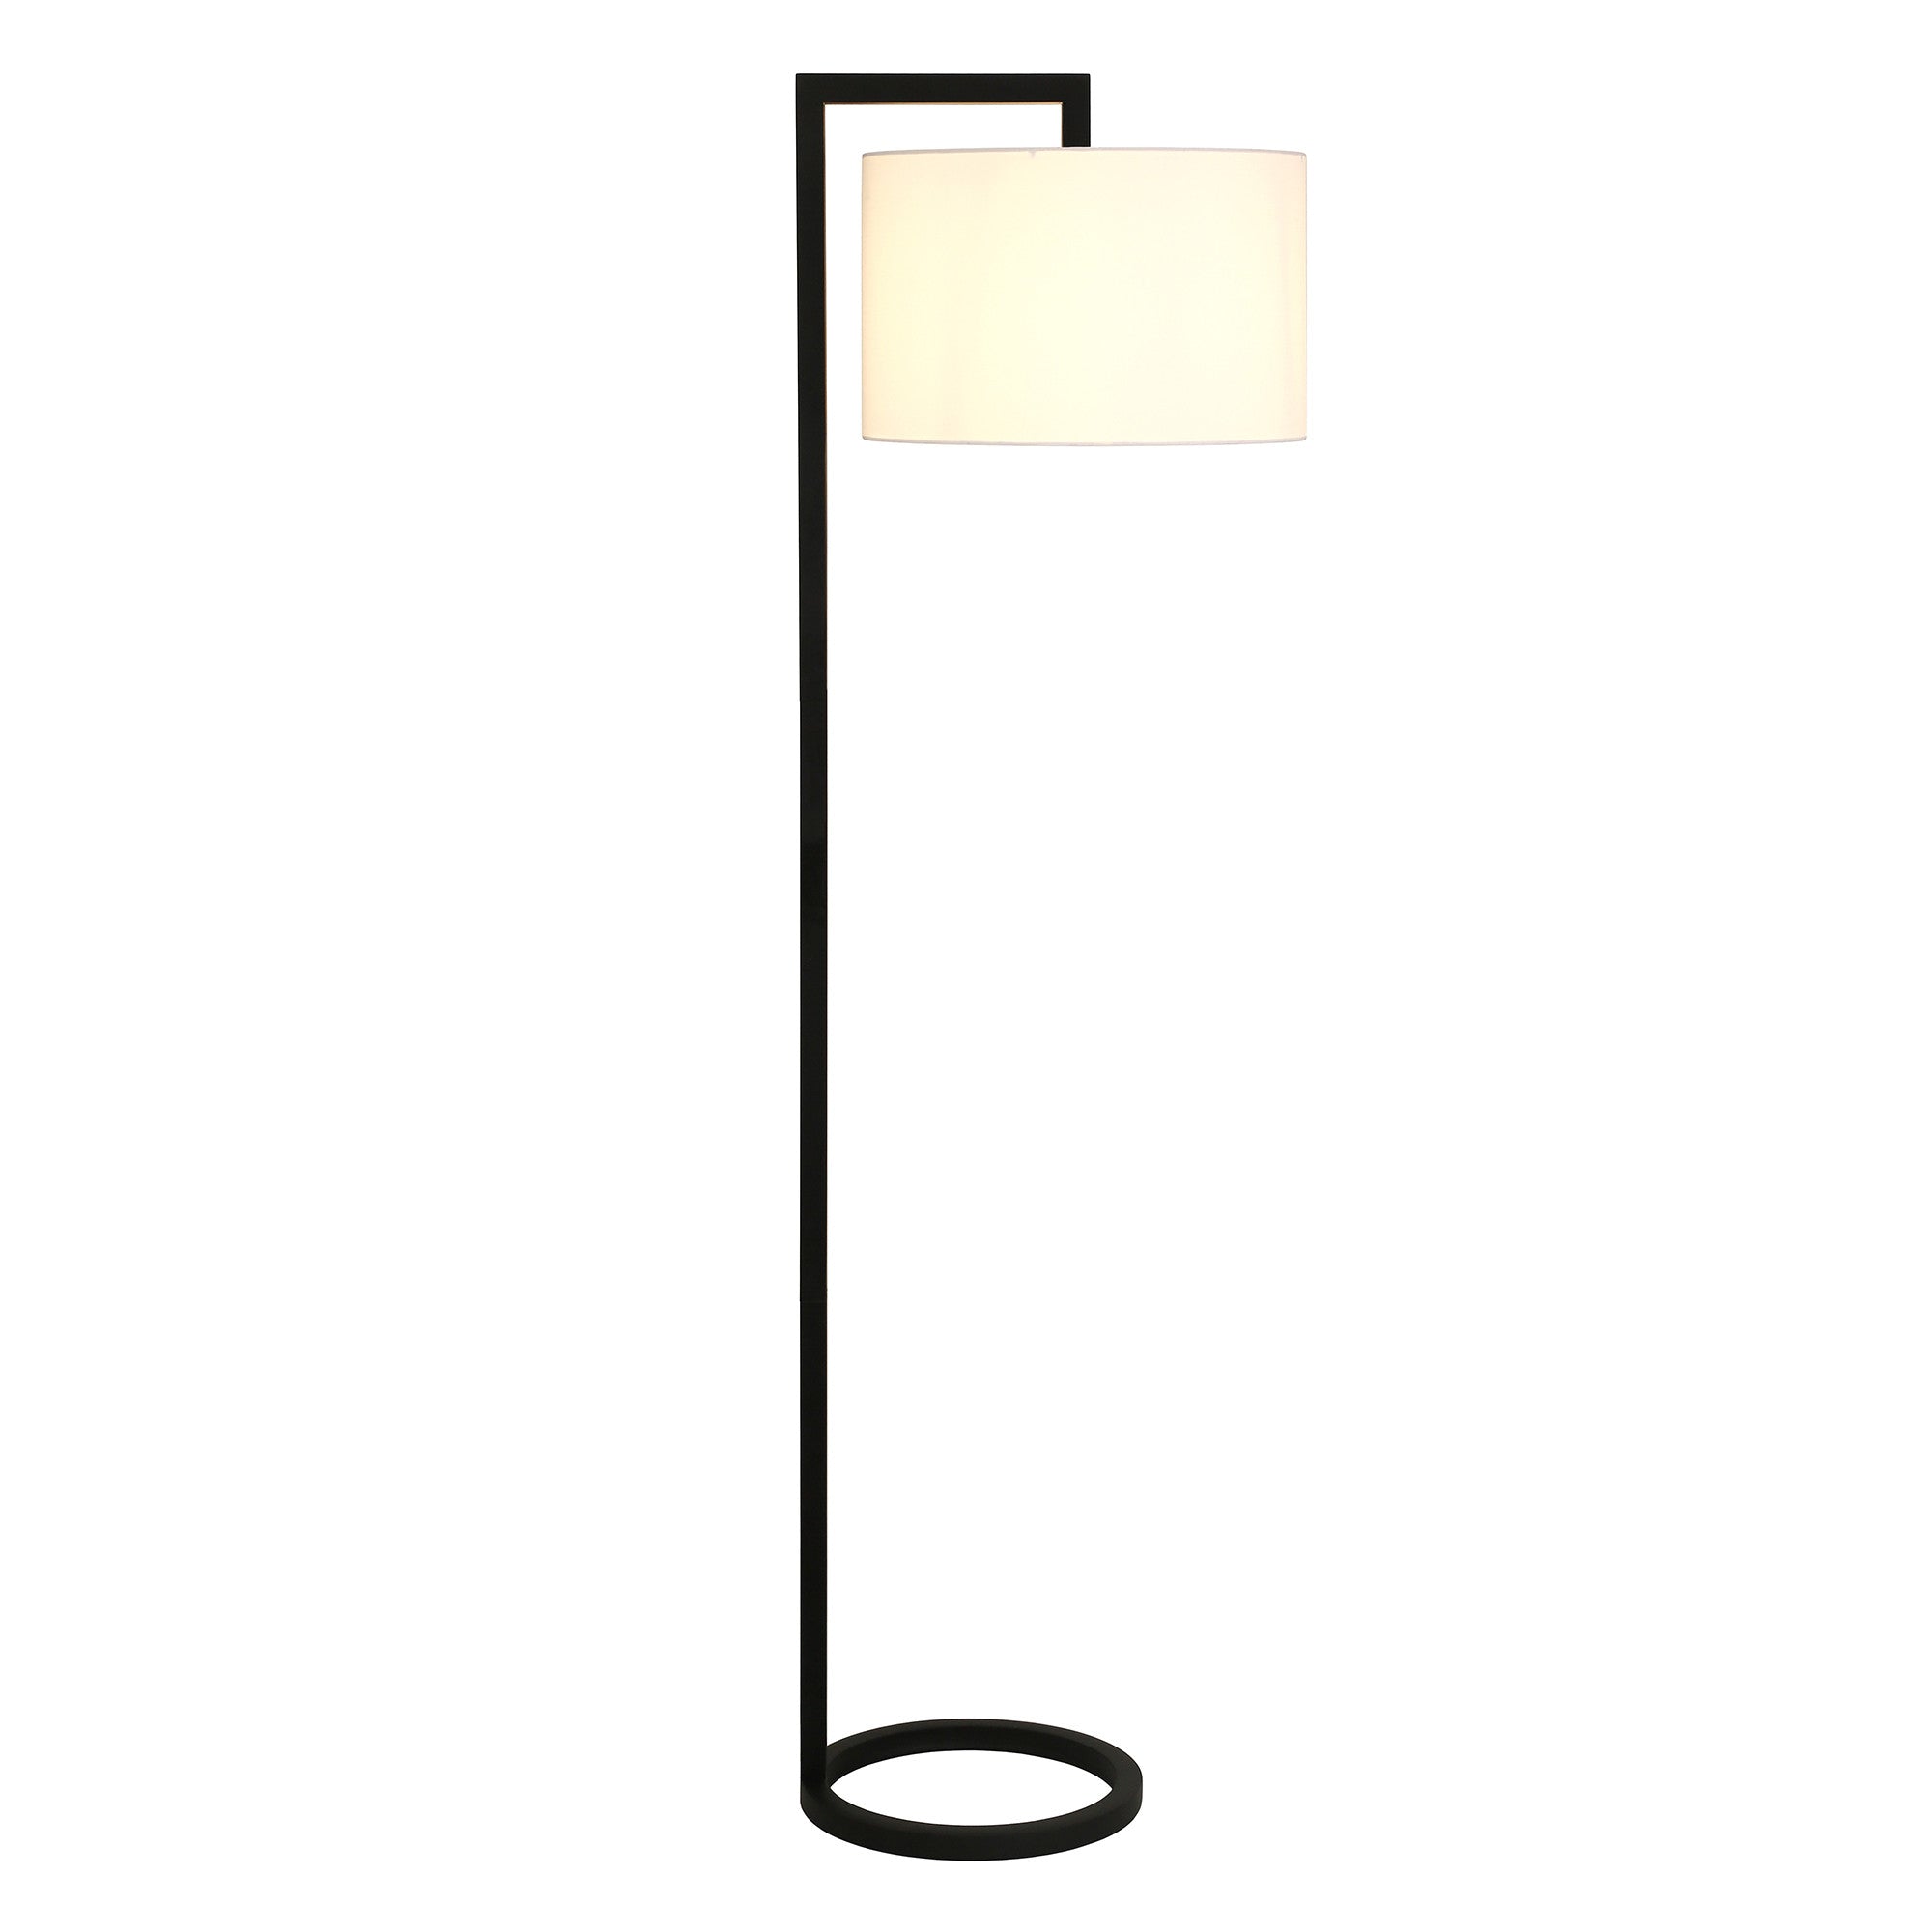 64" Black Traditional Shaped Floor Lamp With White Frosted Glass Drum Shade